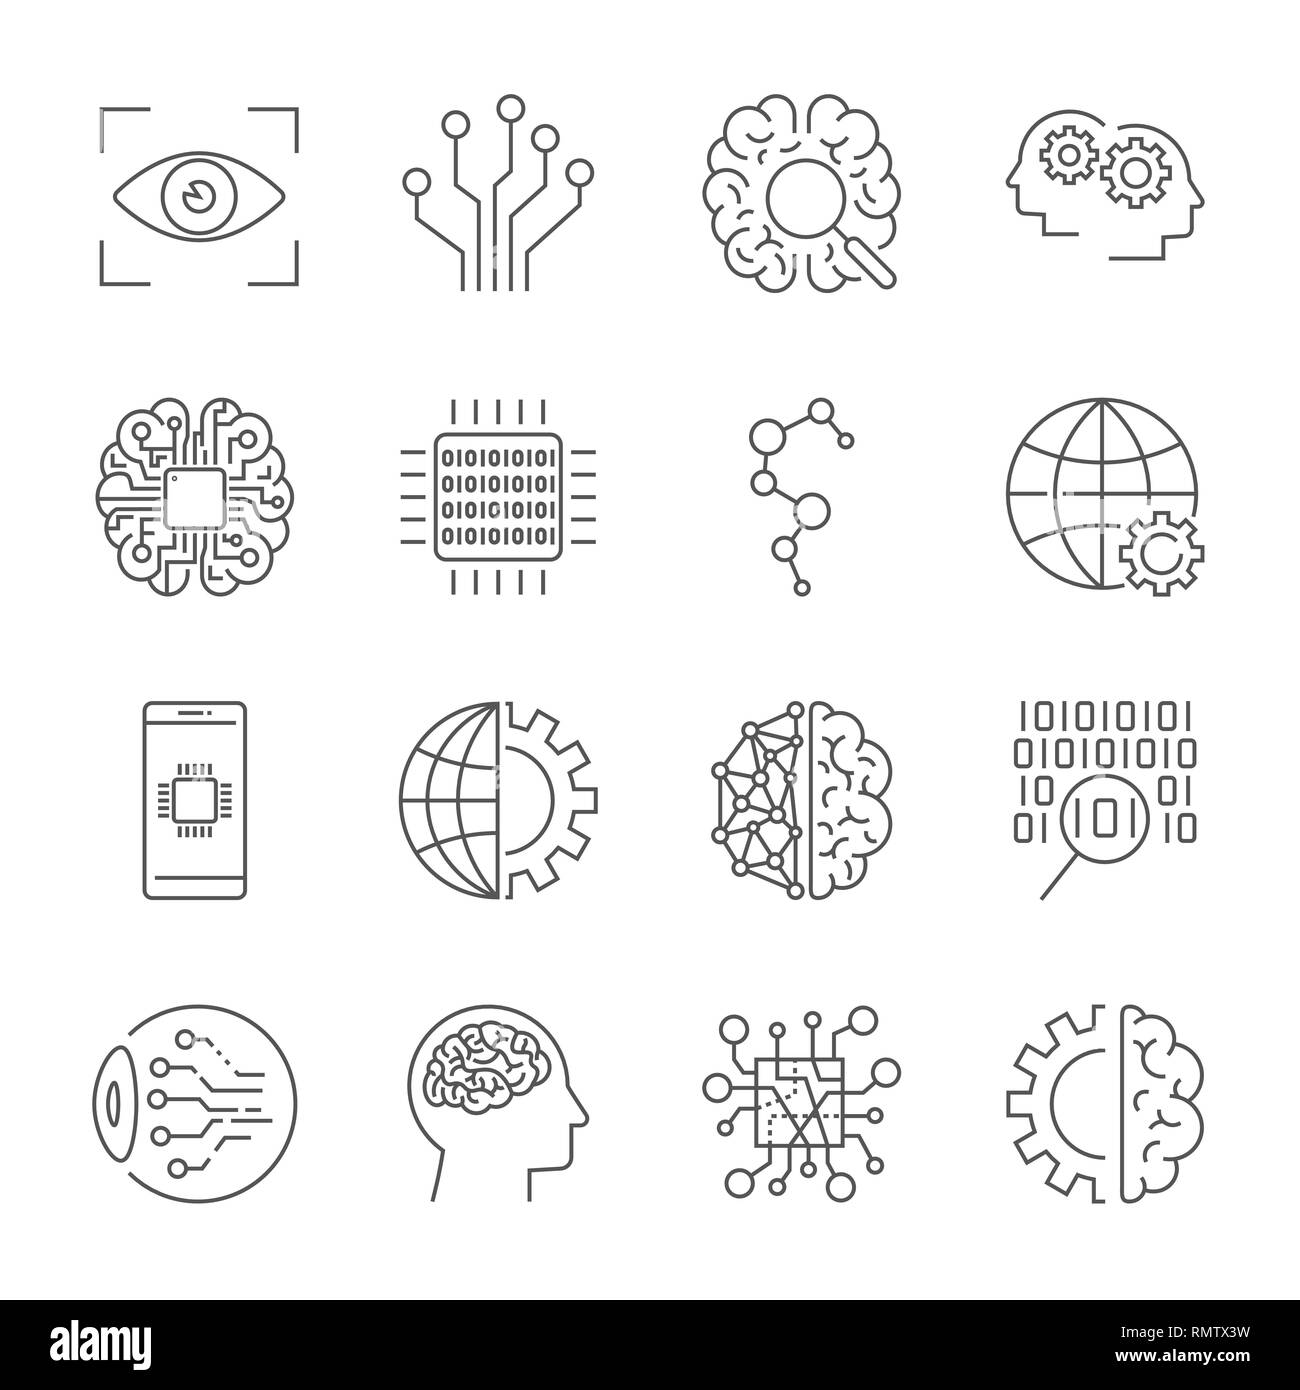 Artificial Intelligence. Vector icon set for artificial intelligence AI concept. Various symbols for the topic using flat design. Editable stroke. Stock Vector